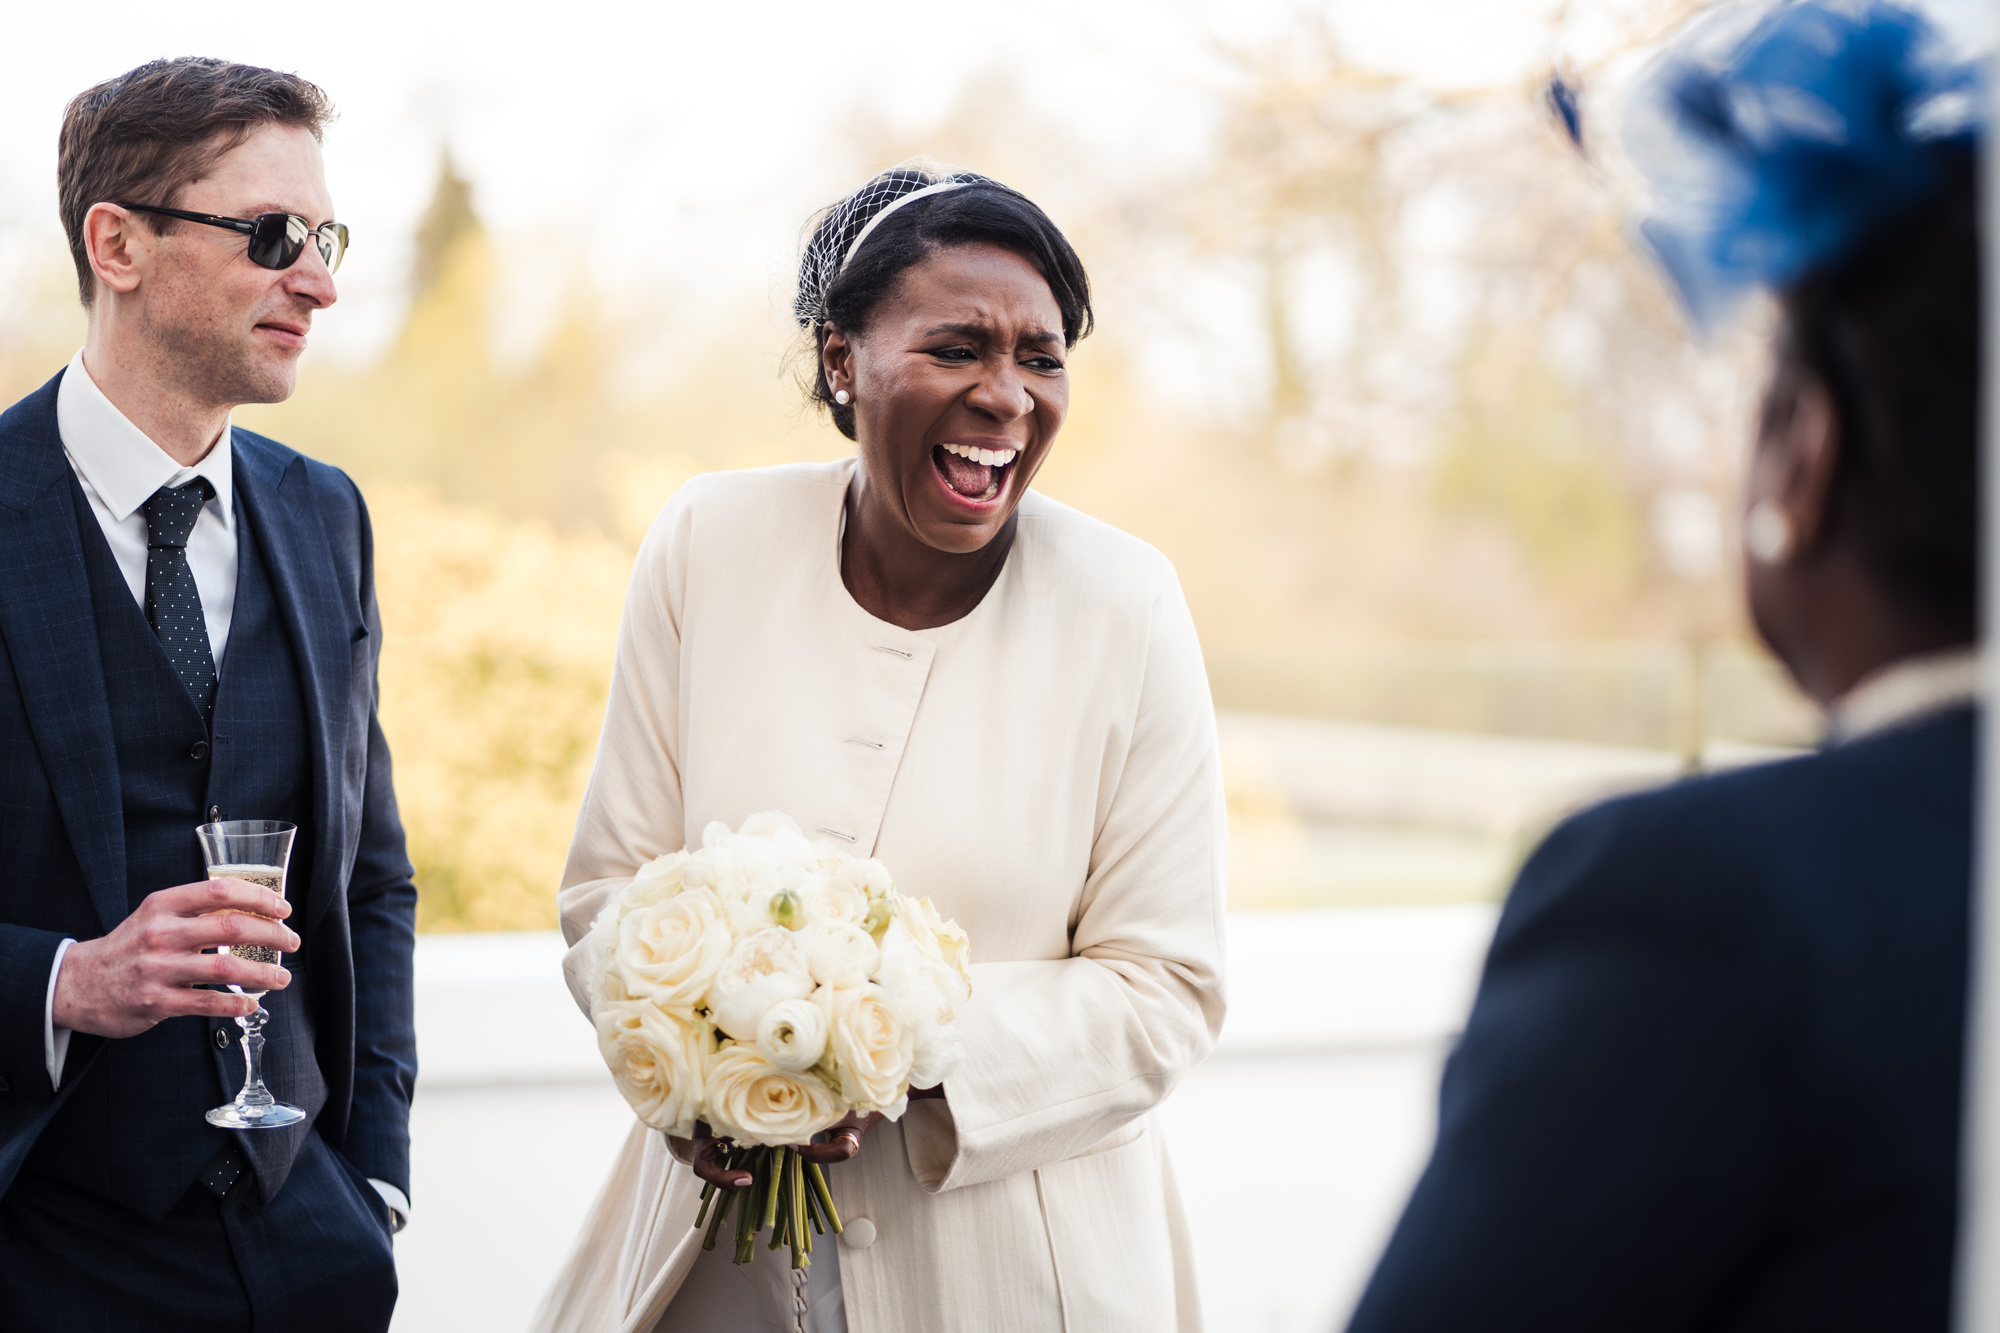 bride laughs at guests and groom looks admiringly at her holding a glass of champagne during the wedding ceremony